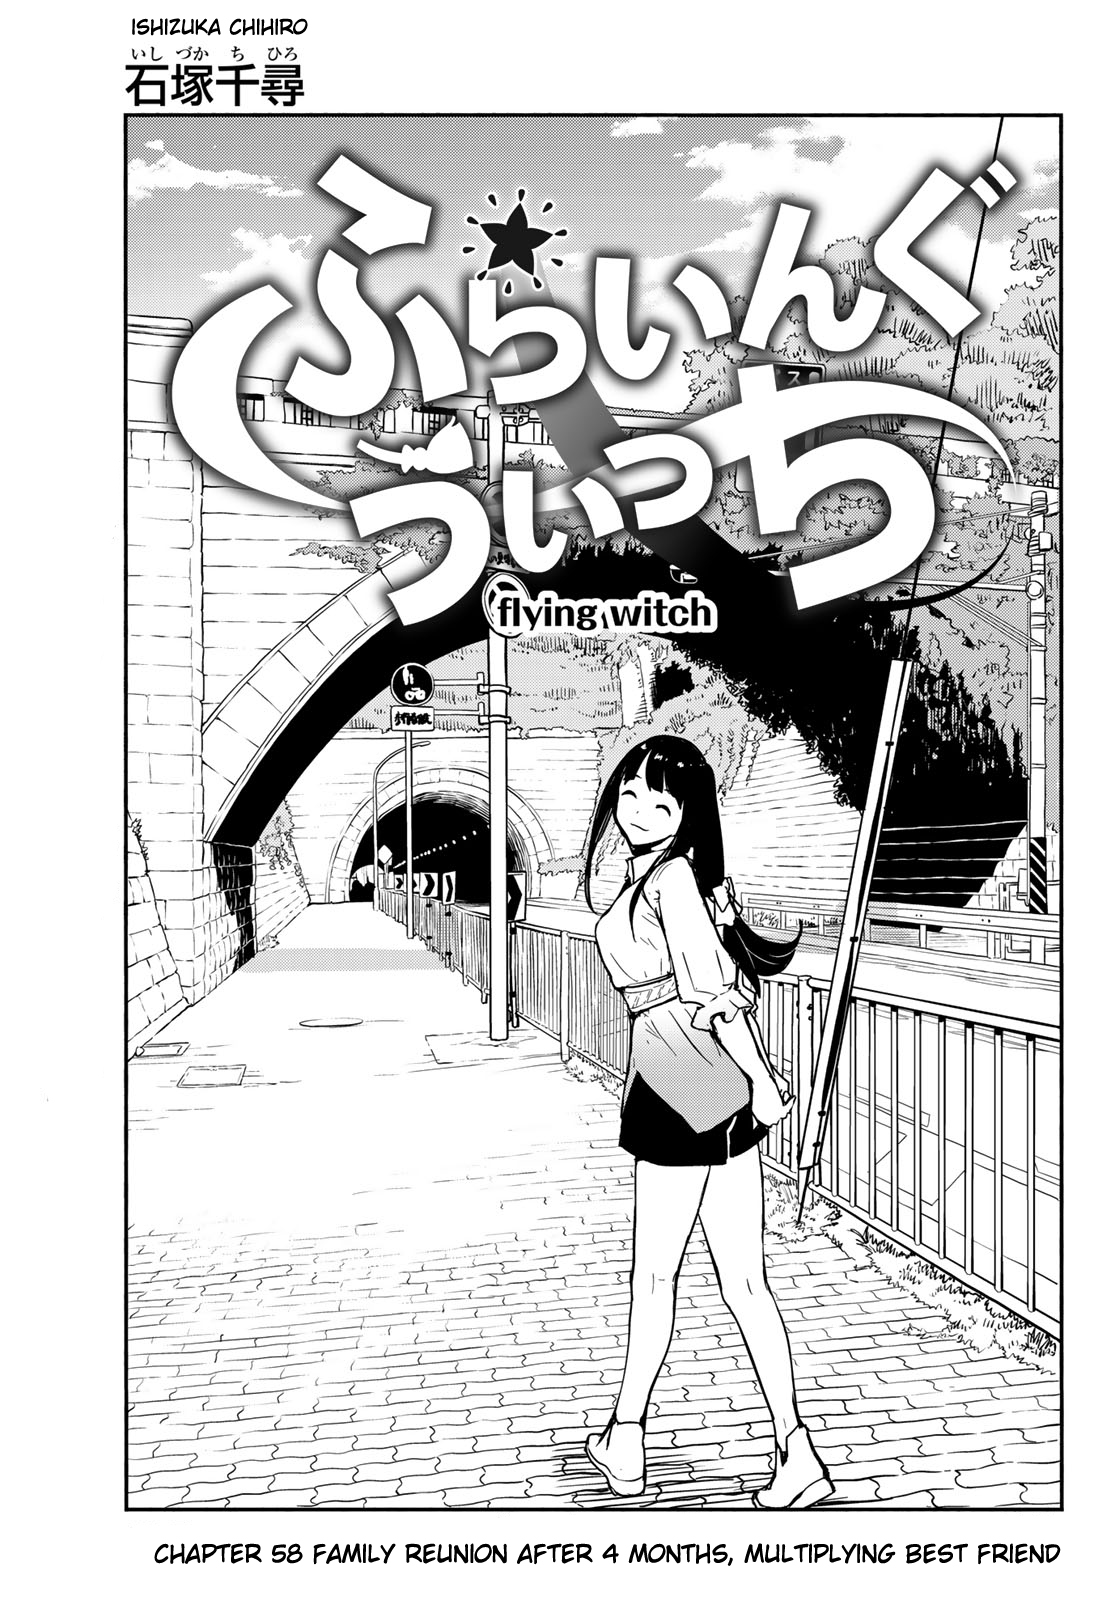 Flying Witch (Ishizuka Chihiro) Chapter 58: Family Reunion After 4 Months, Multiplying Best Friend - Picture 3